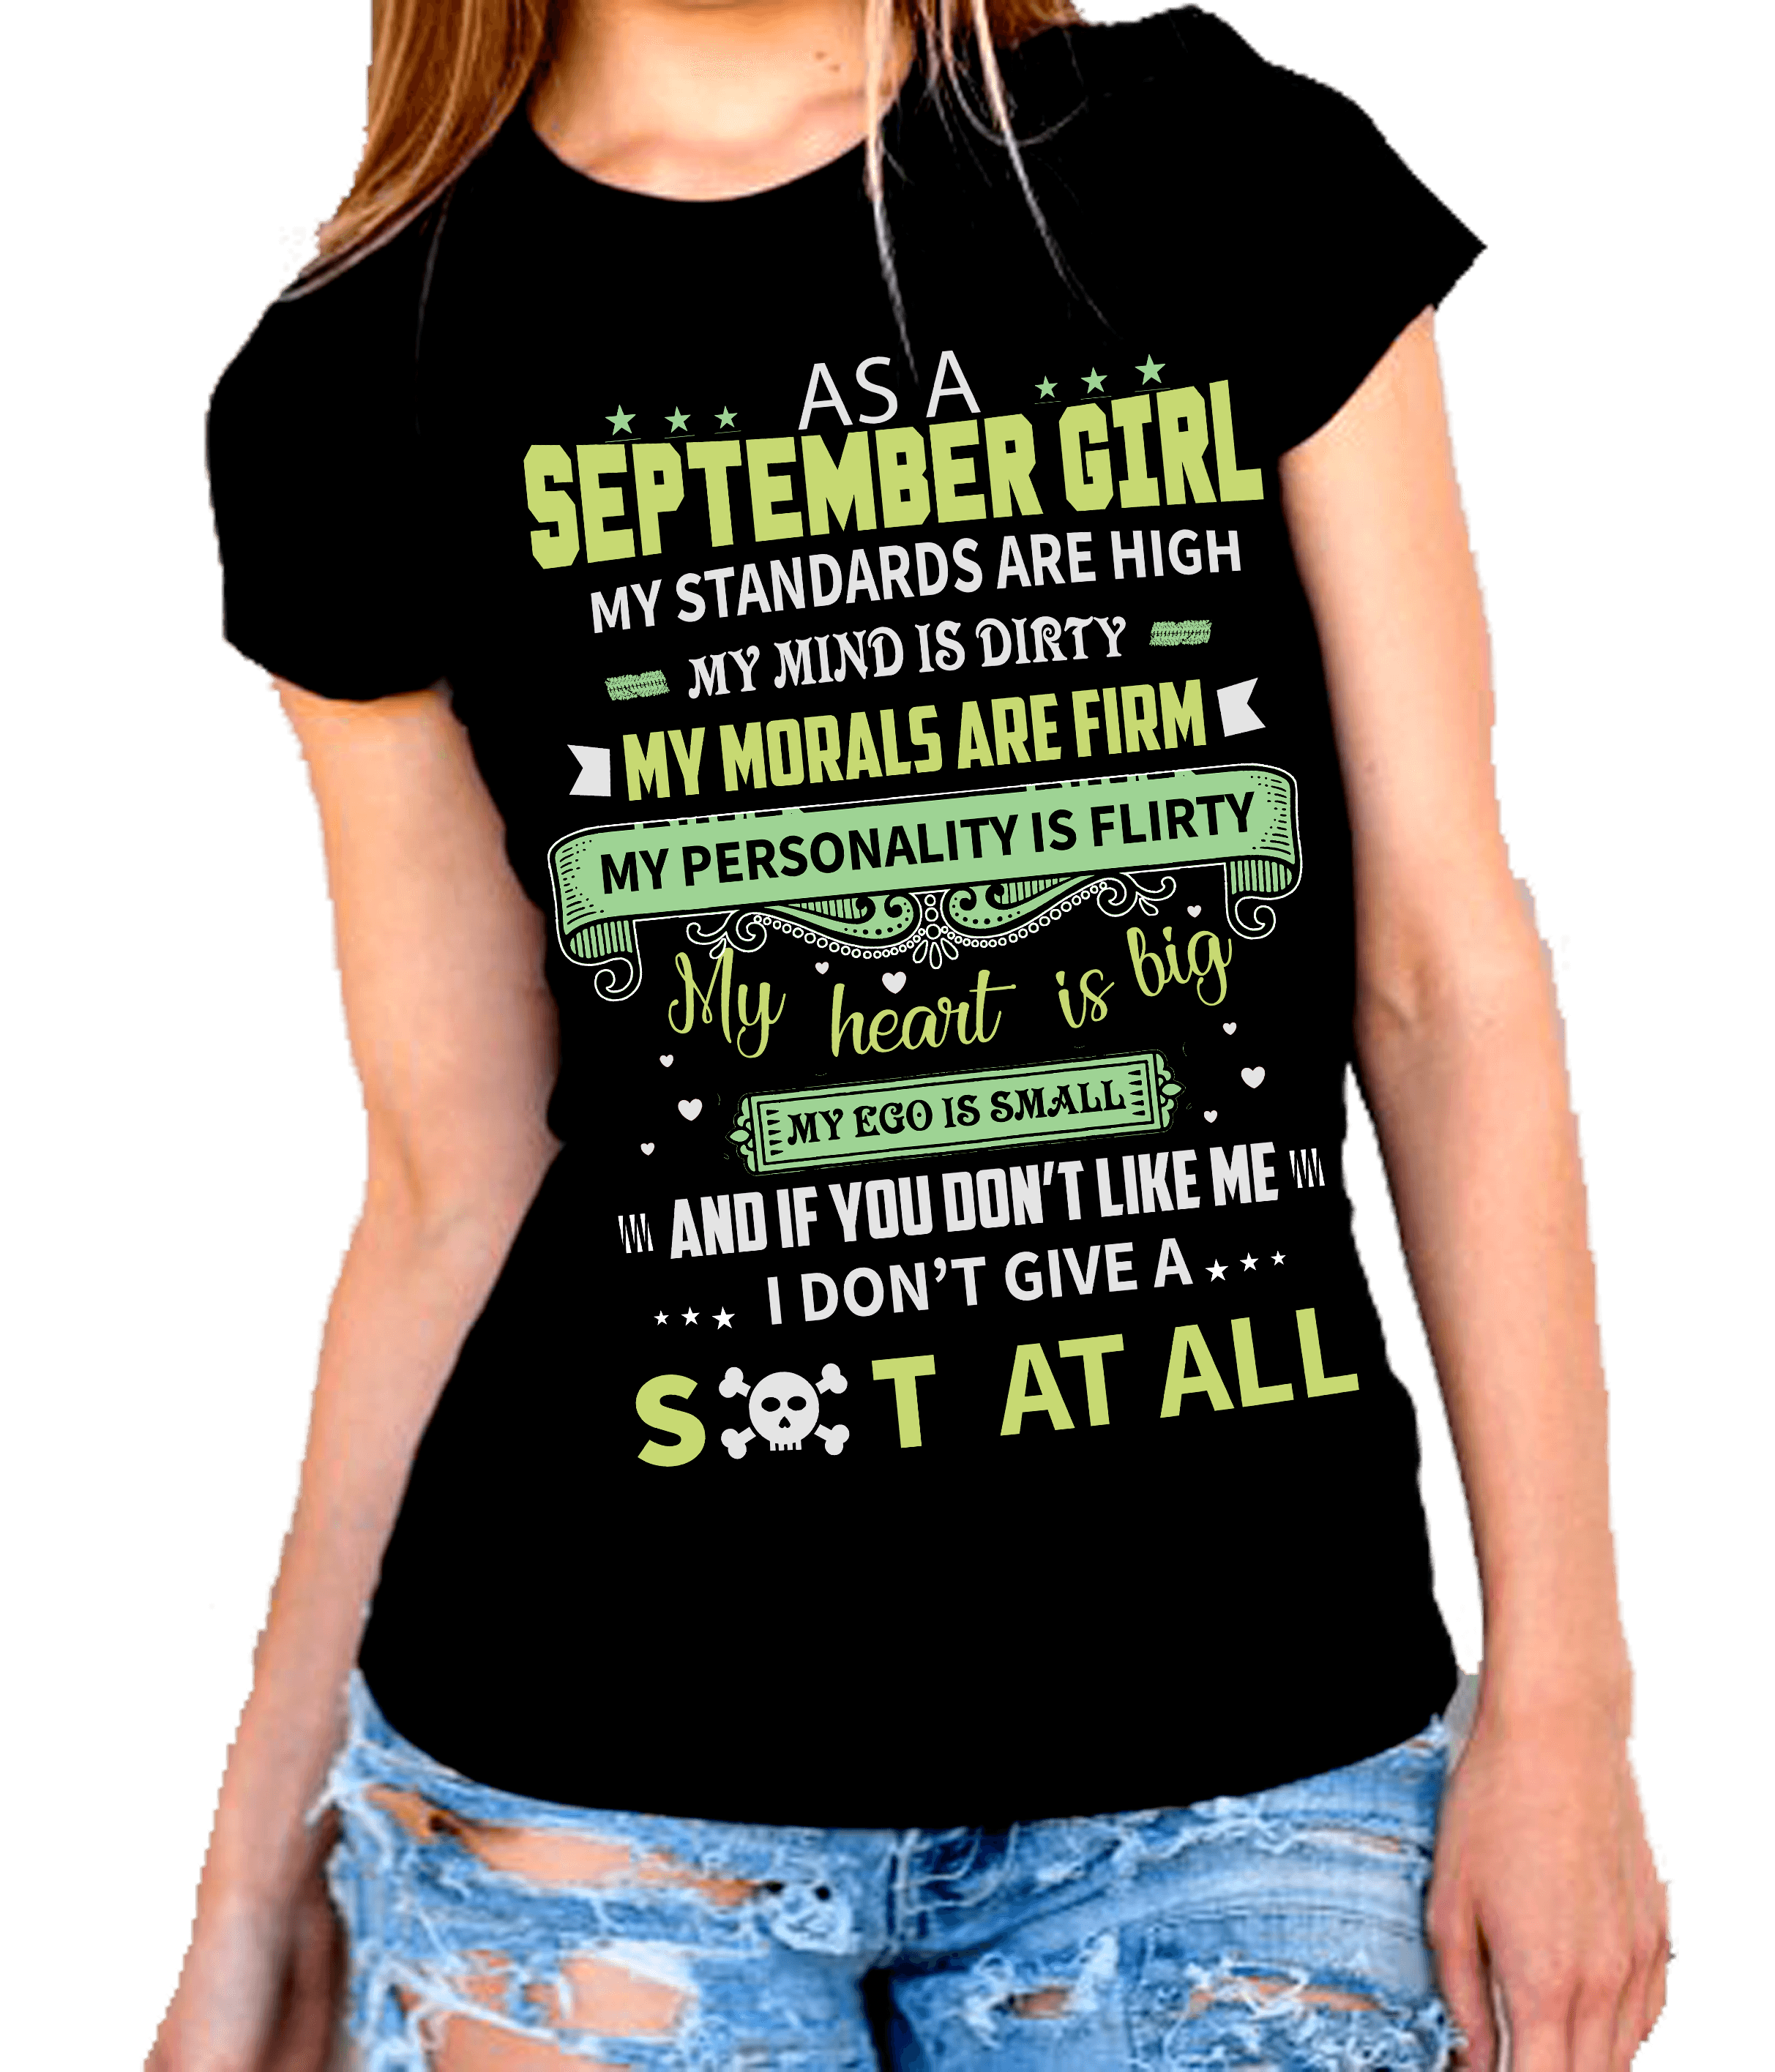 "September Pack Of 5 Shirts"